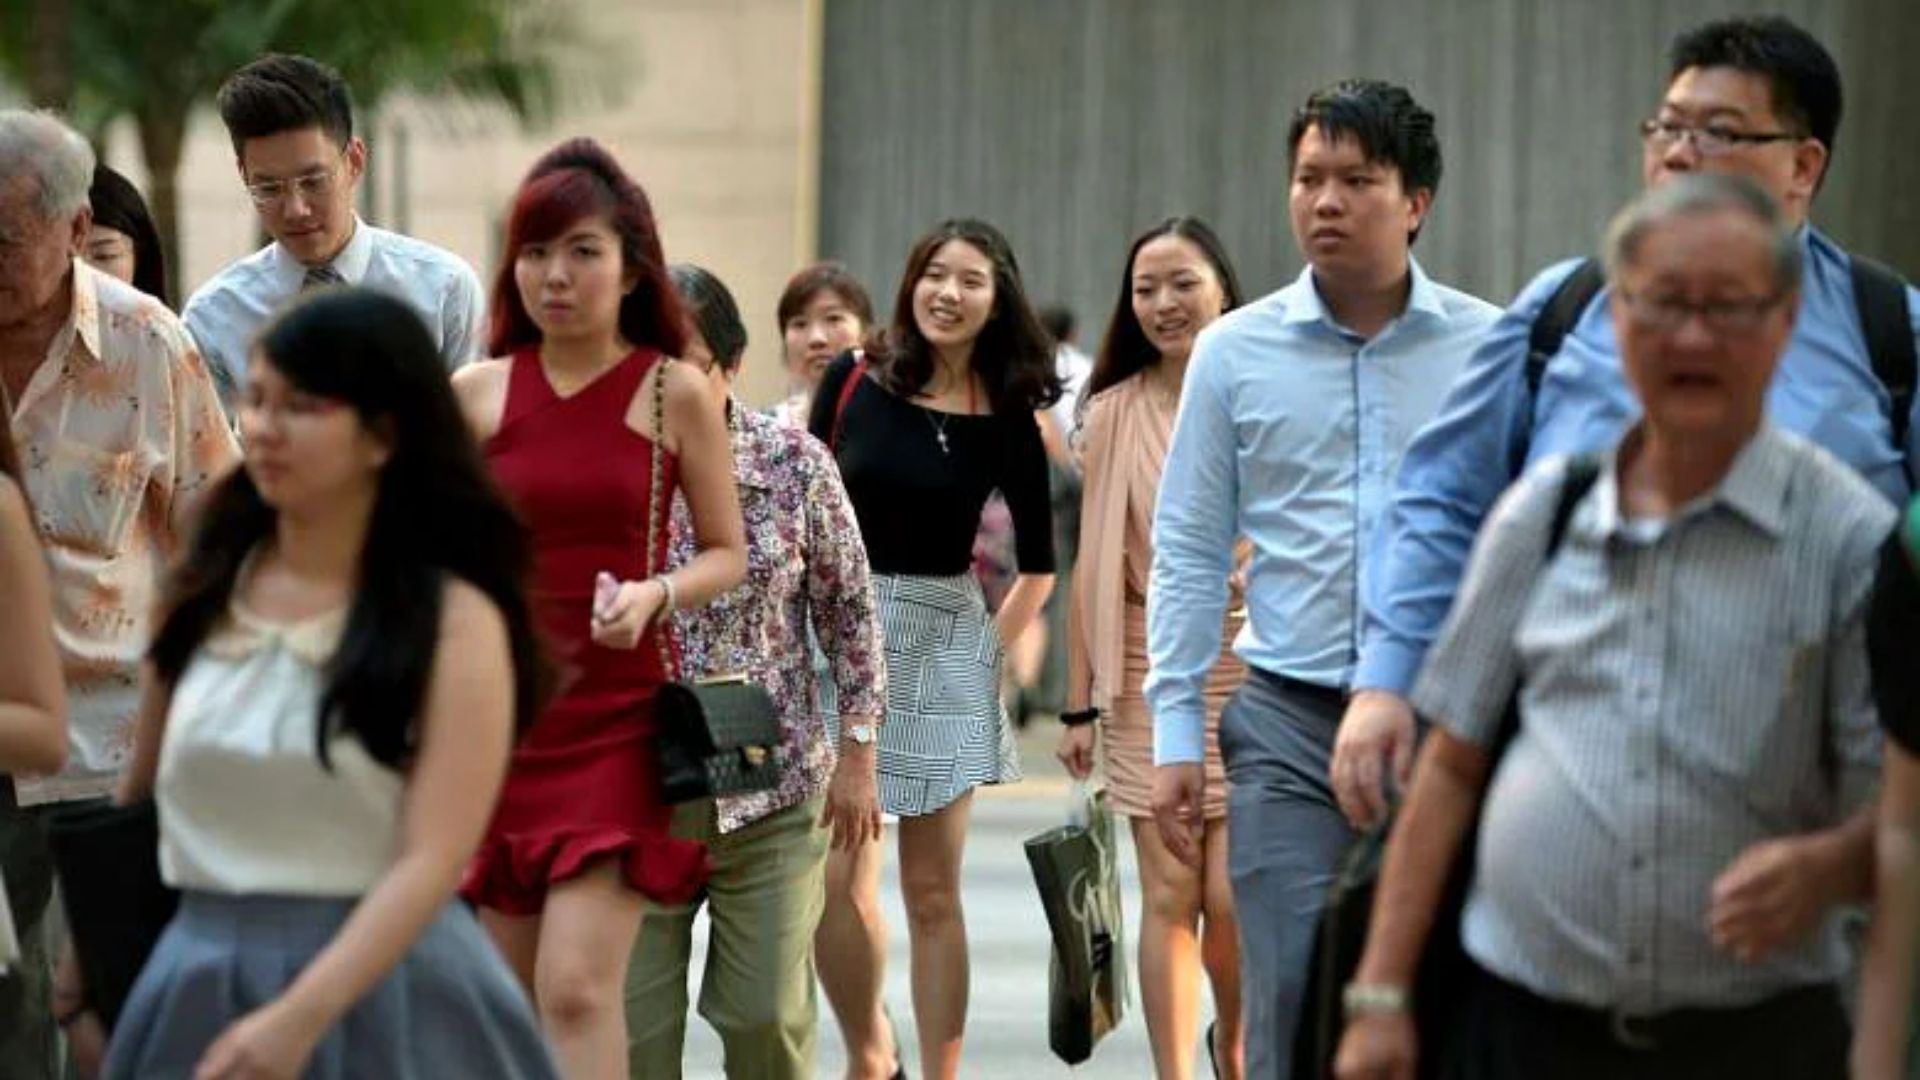 Inflation cycle and economic uncertainty: How Singapore Boomers and Zoomers cope